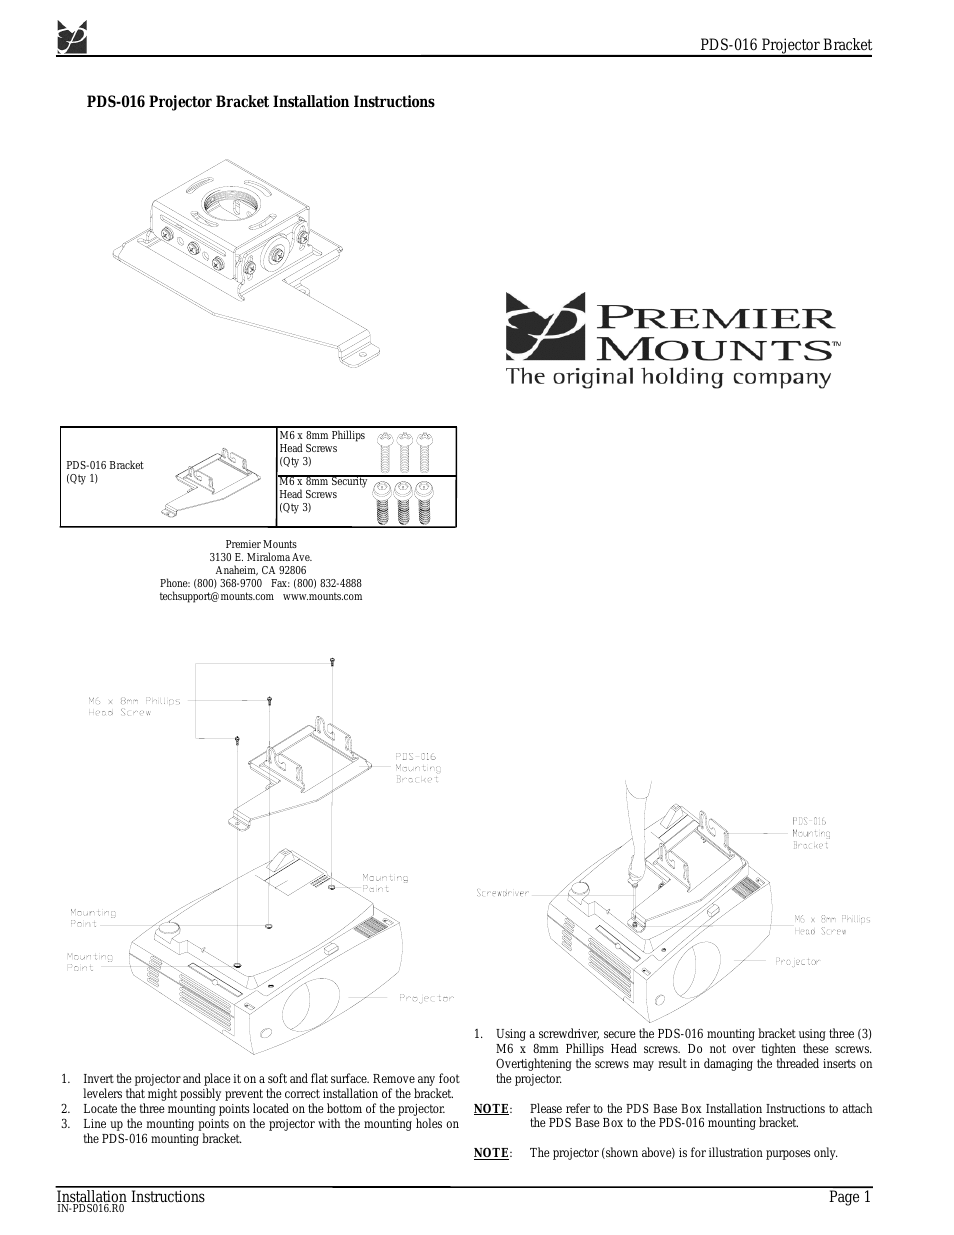 Low-Profile Dedicated Projector Mount PDS-016